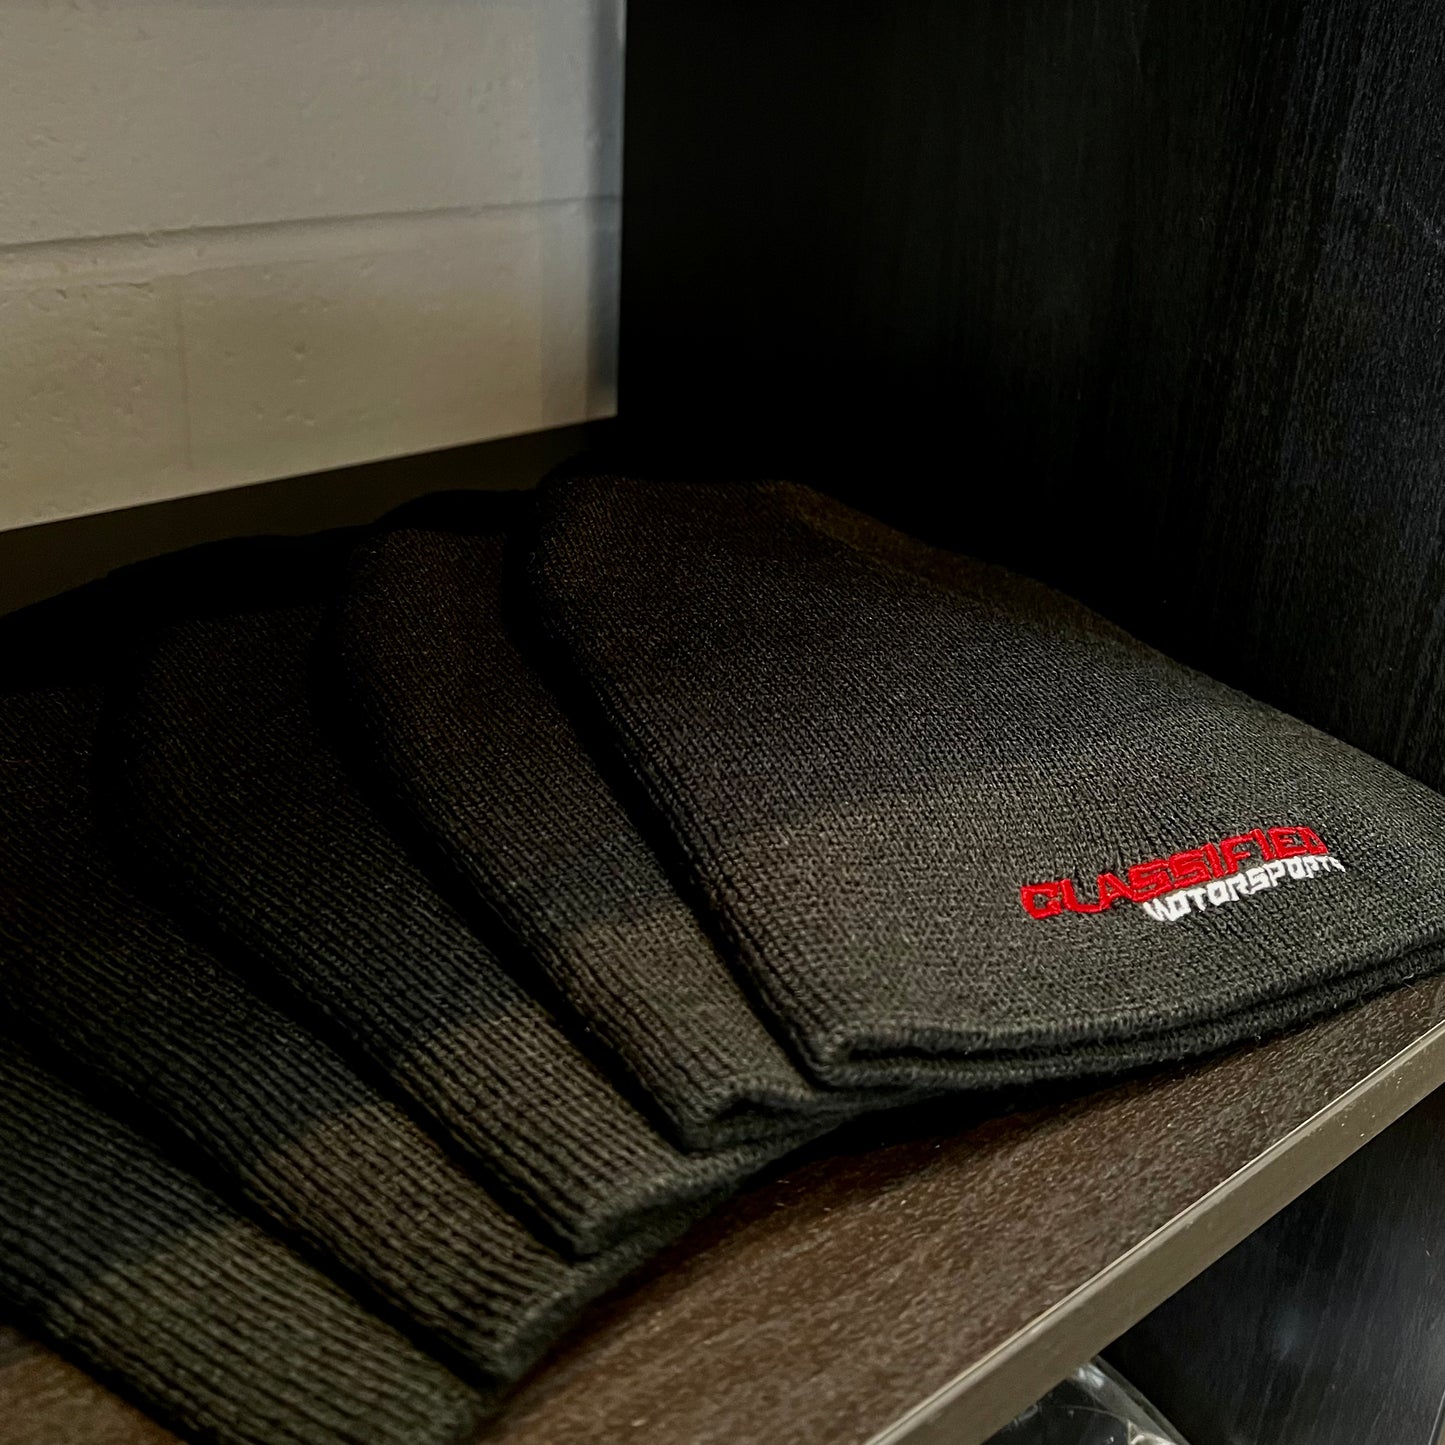 Classified Motorsports Toque (Beanie)